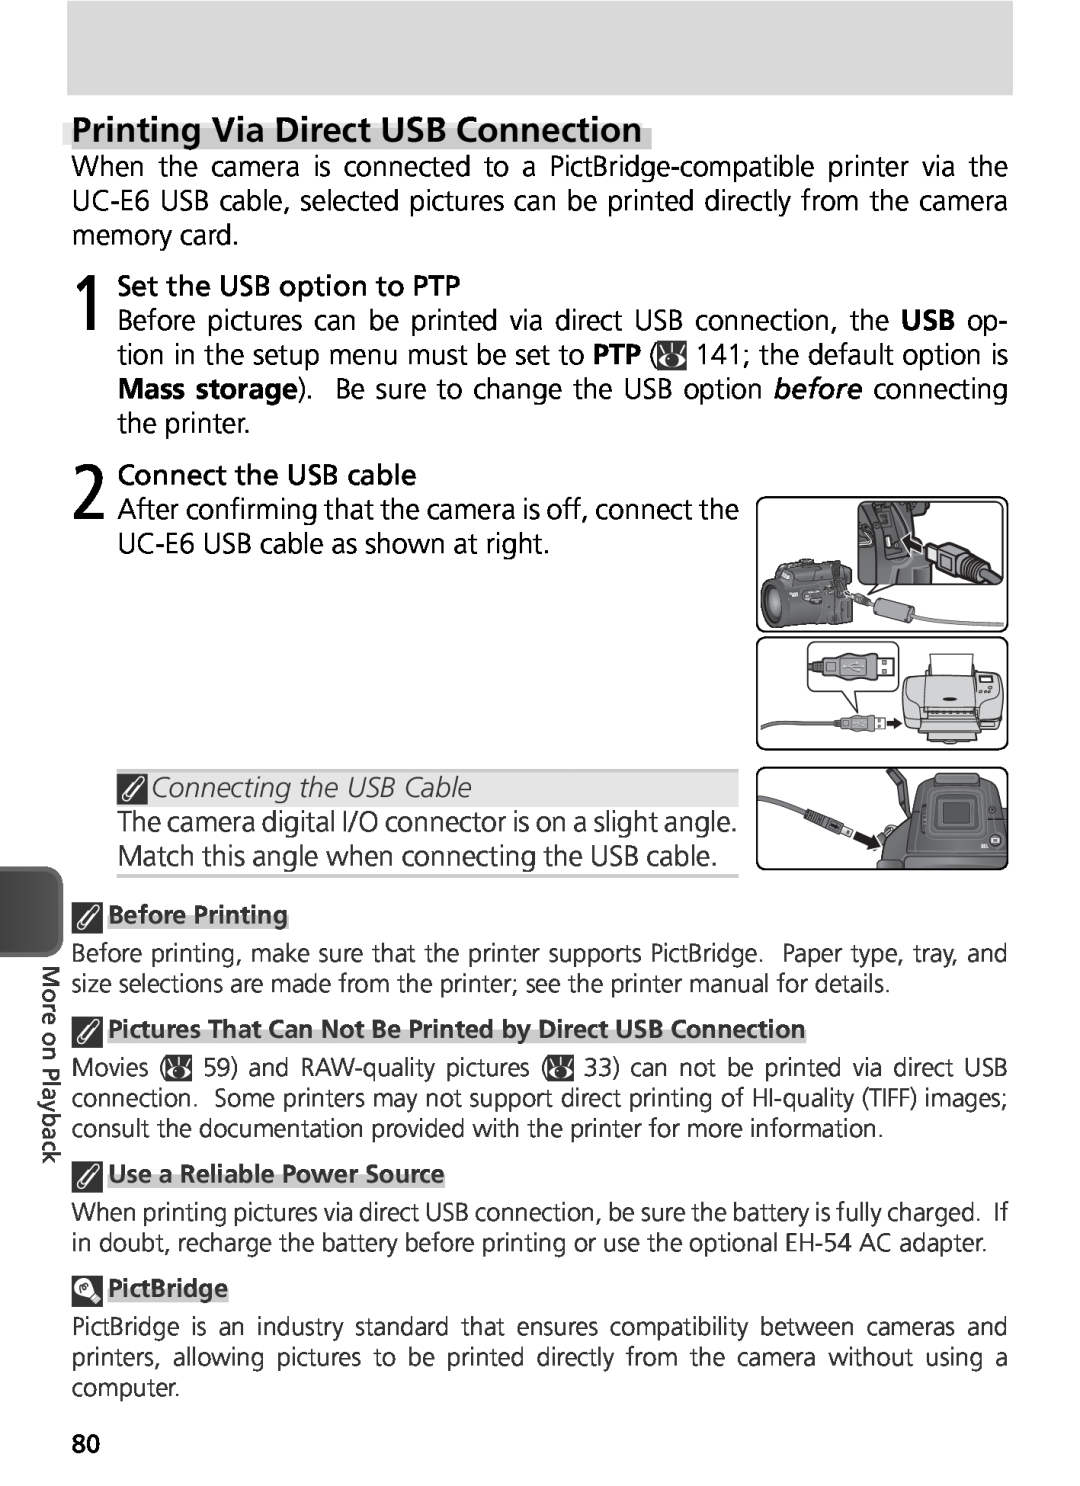 Nikon COOLPIX8800 manual Printing Via Direct USB Connection, Connecting the USB Cable 